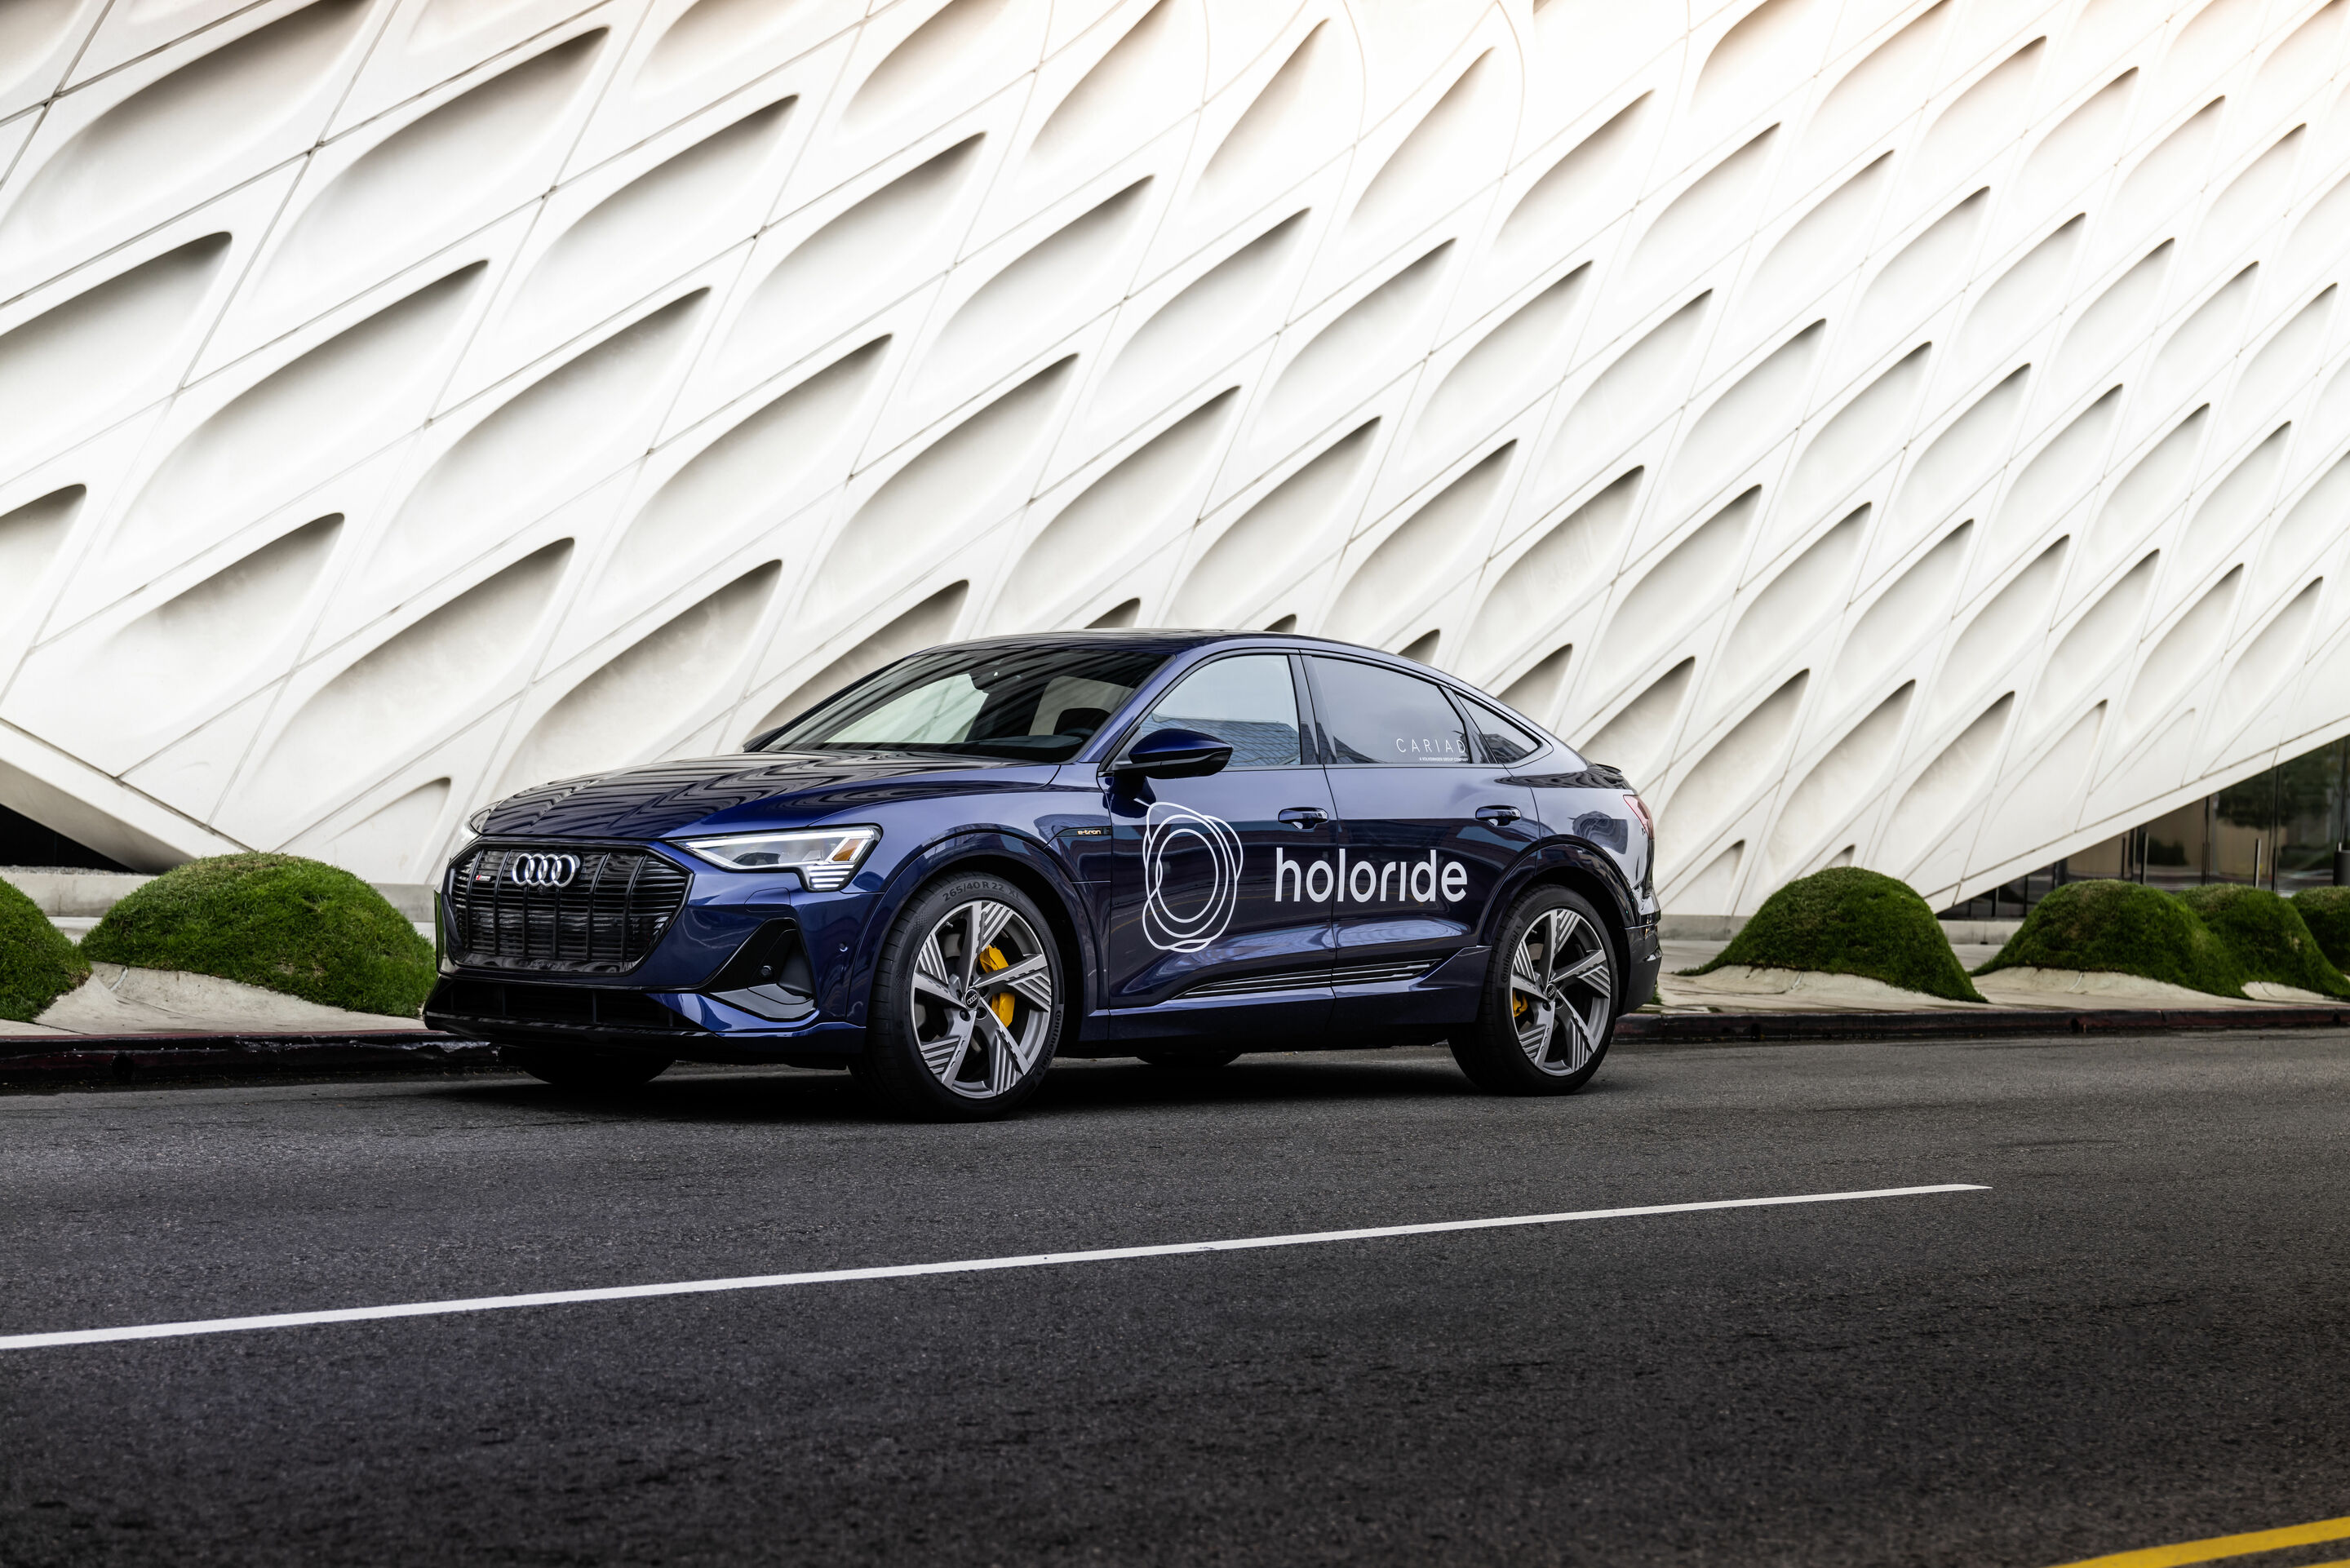 Audi at CES 2023: Test drives with holoride